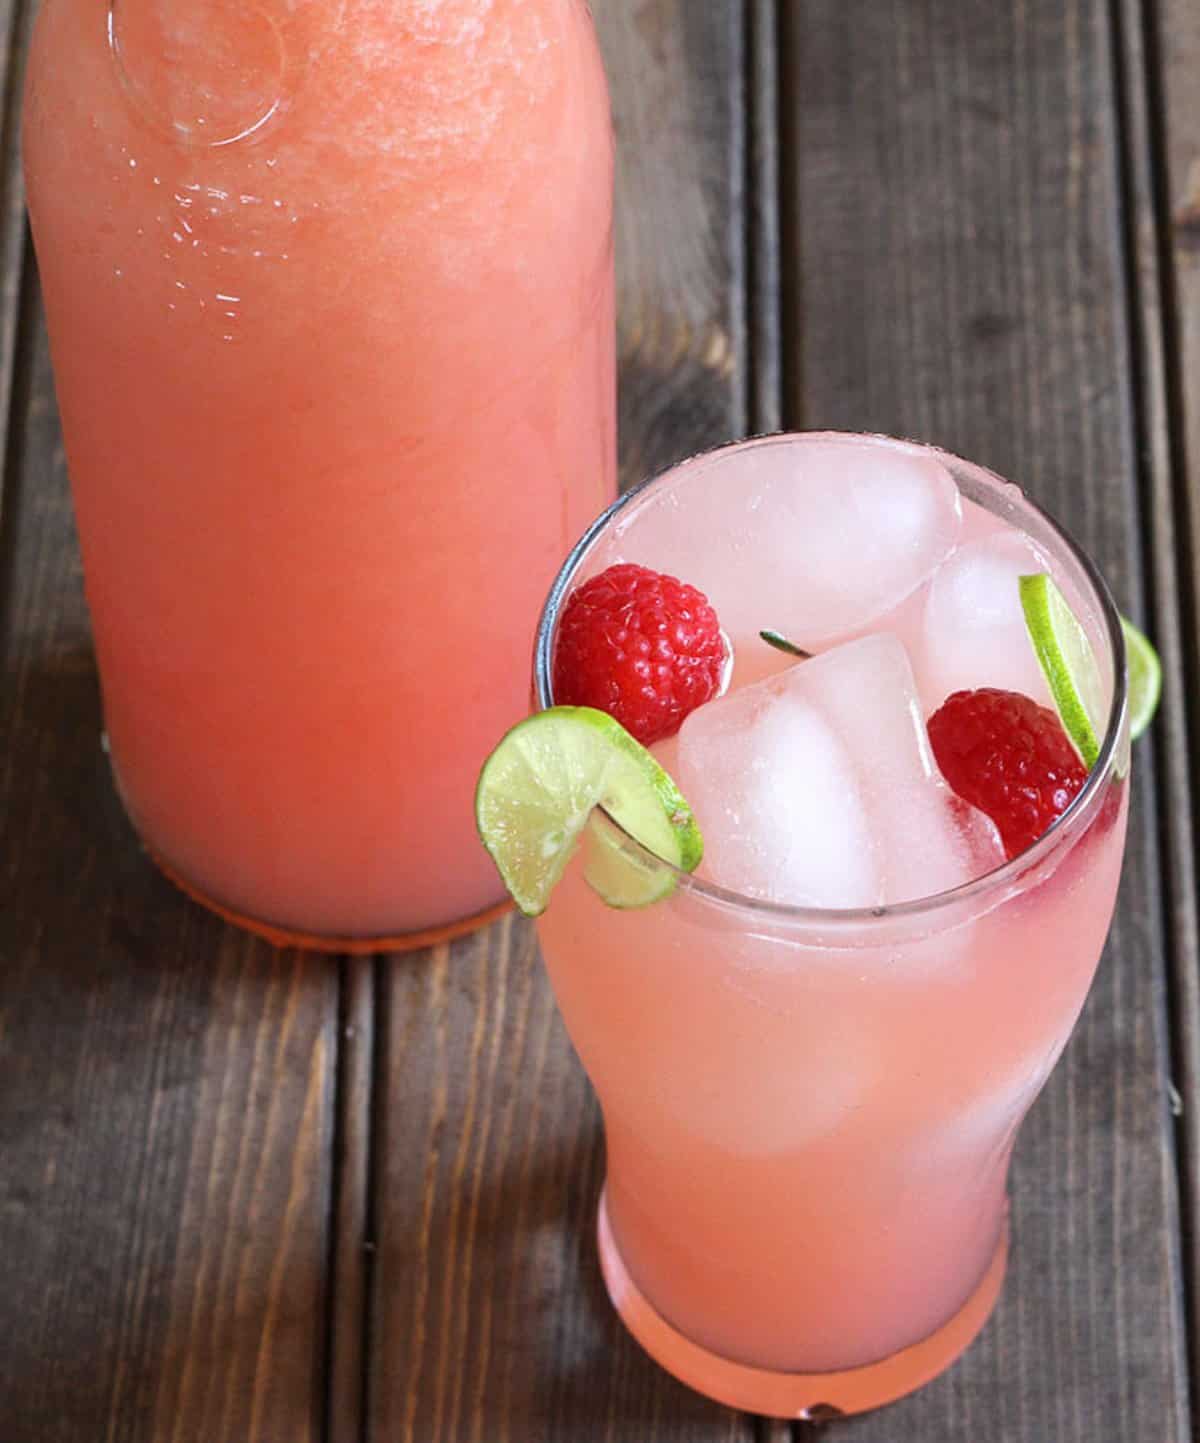 Raspberry Lemonade summer drink served with ice cubes, whole raspberries, and lemon slices in a tall glass.